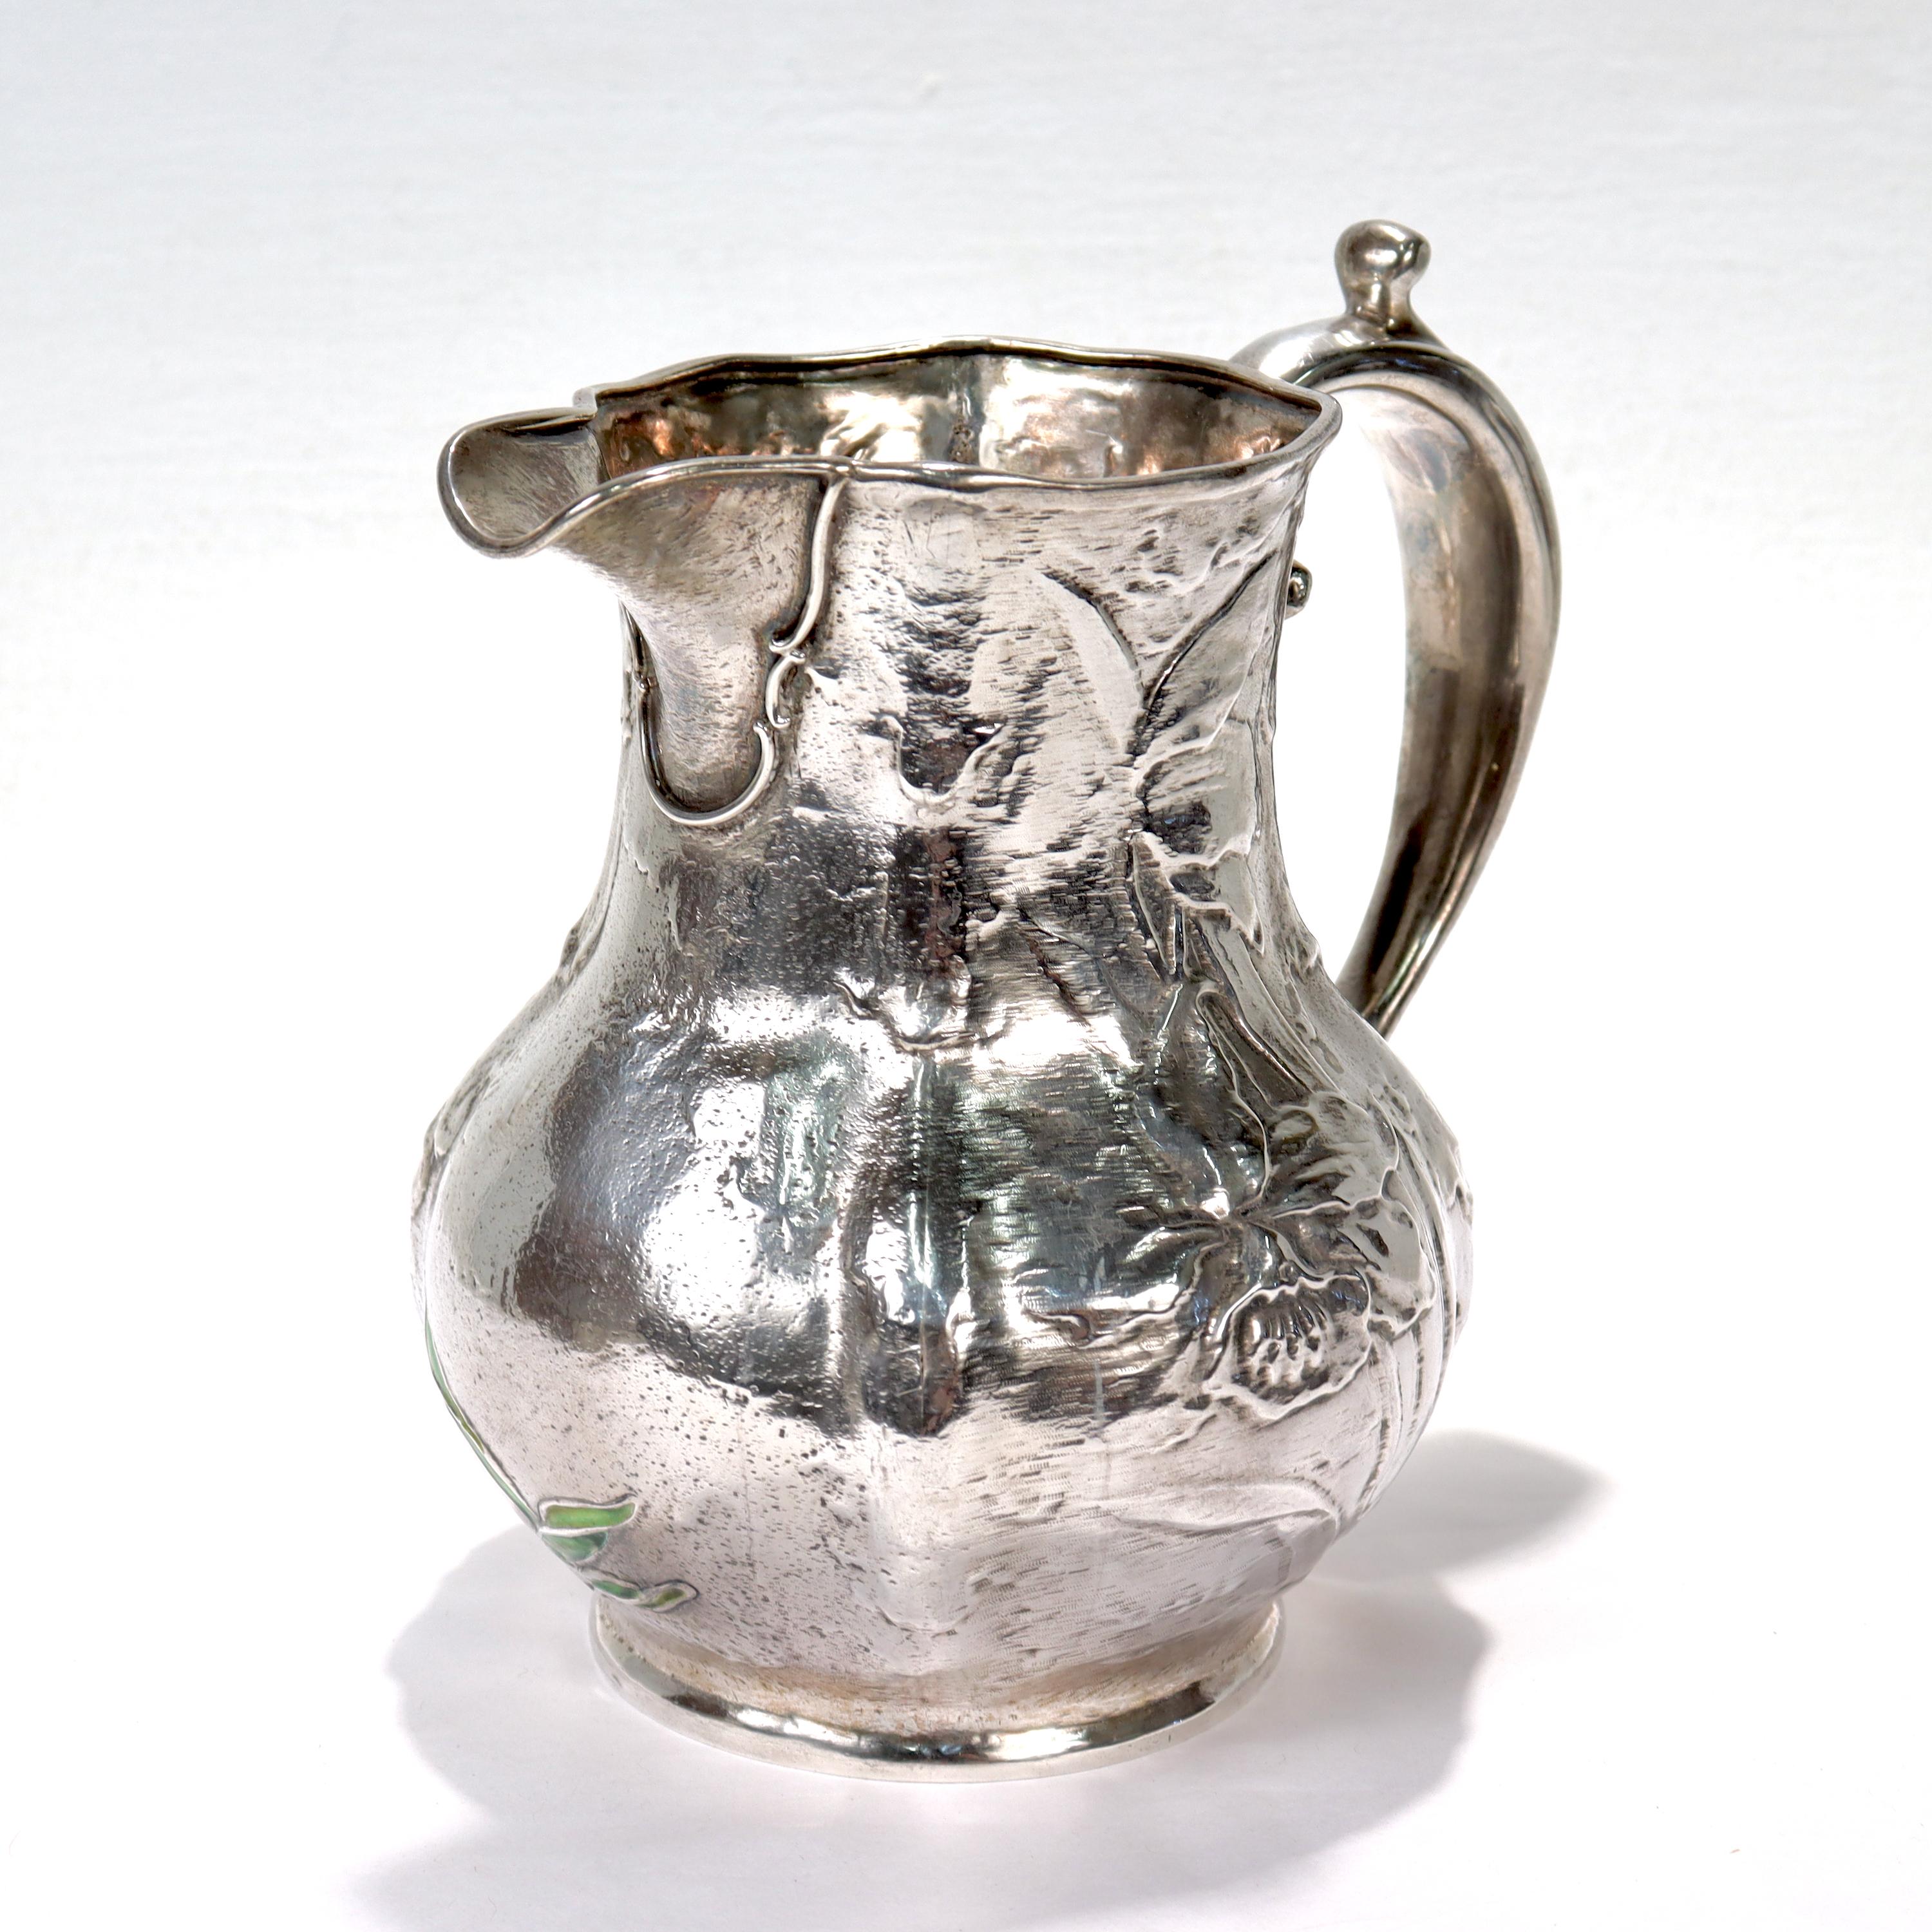 Antique Art Nouveau Gorham Sterling Silver Pitcher or Ewer with Enamel Flowers For Sale 4